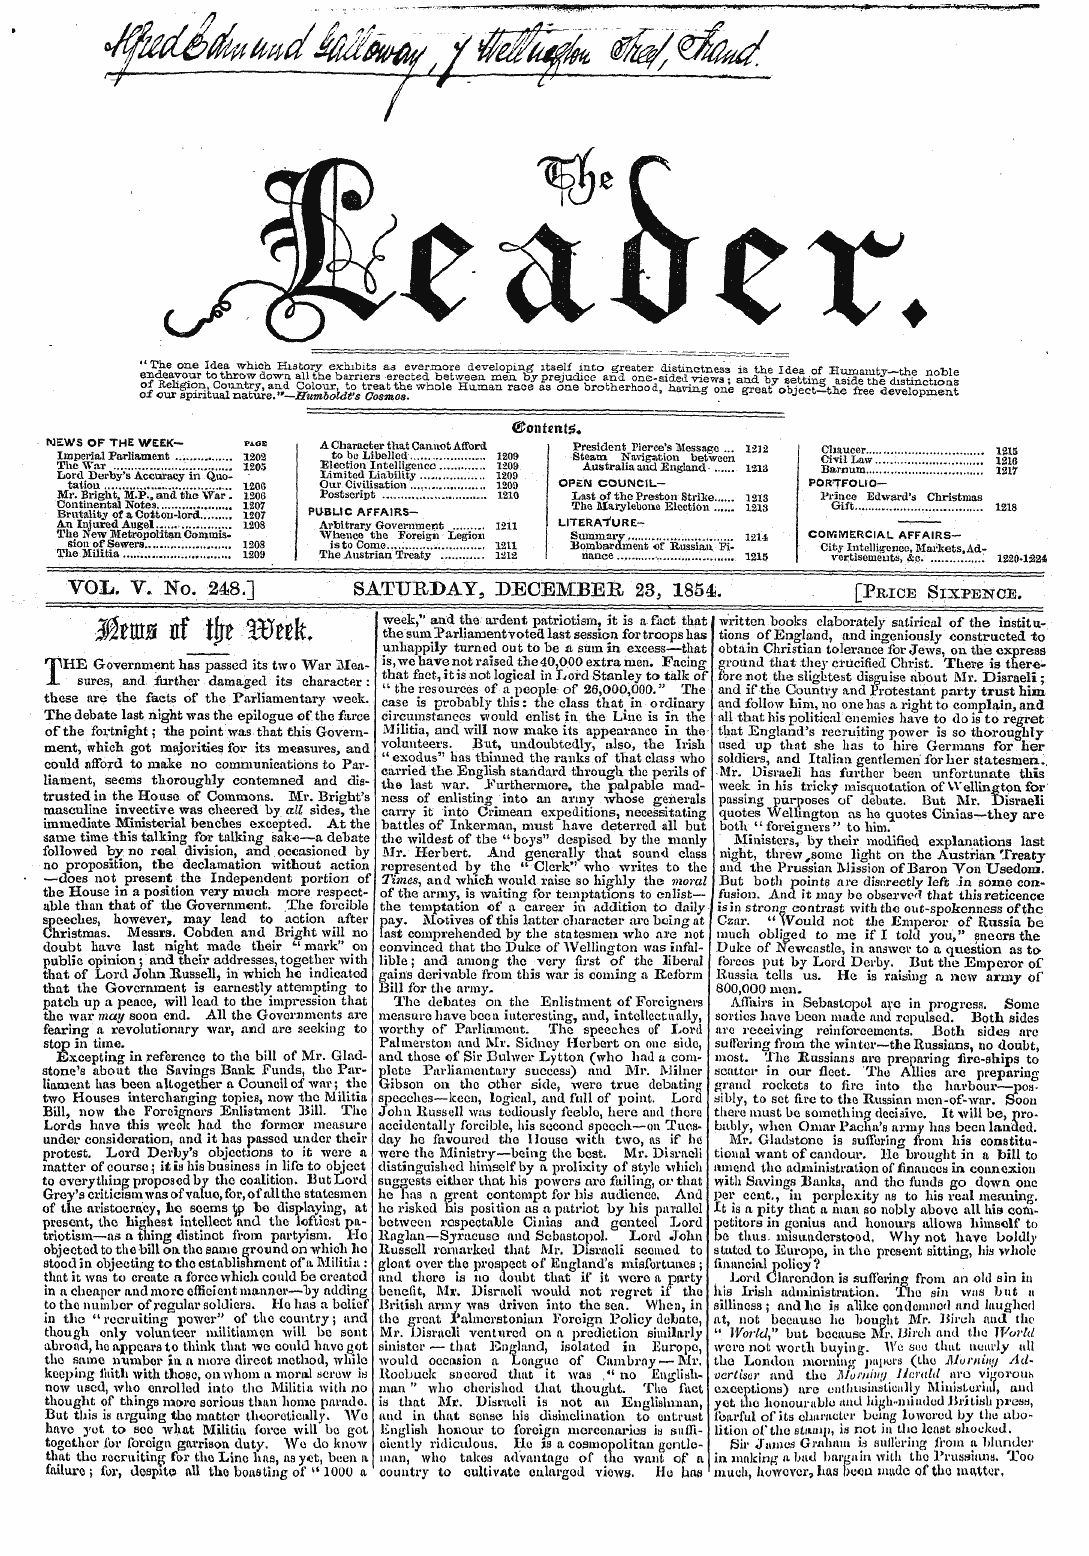 Leader (1850-1860): jS F Y, 2nd edition - News Of The Week- Paoe A Character That ...